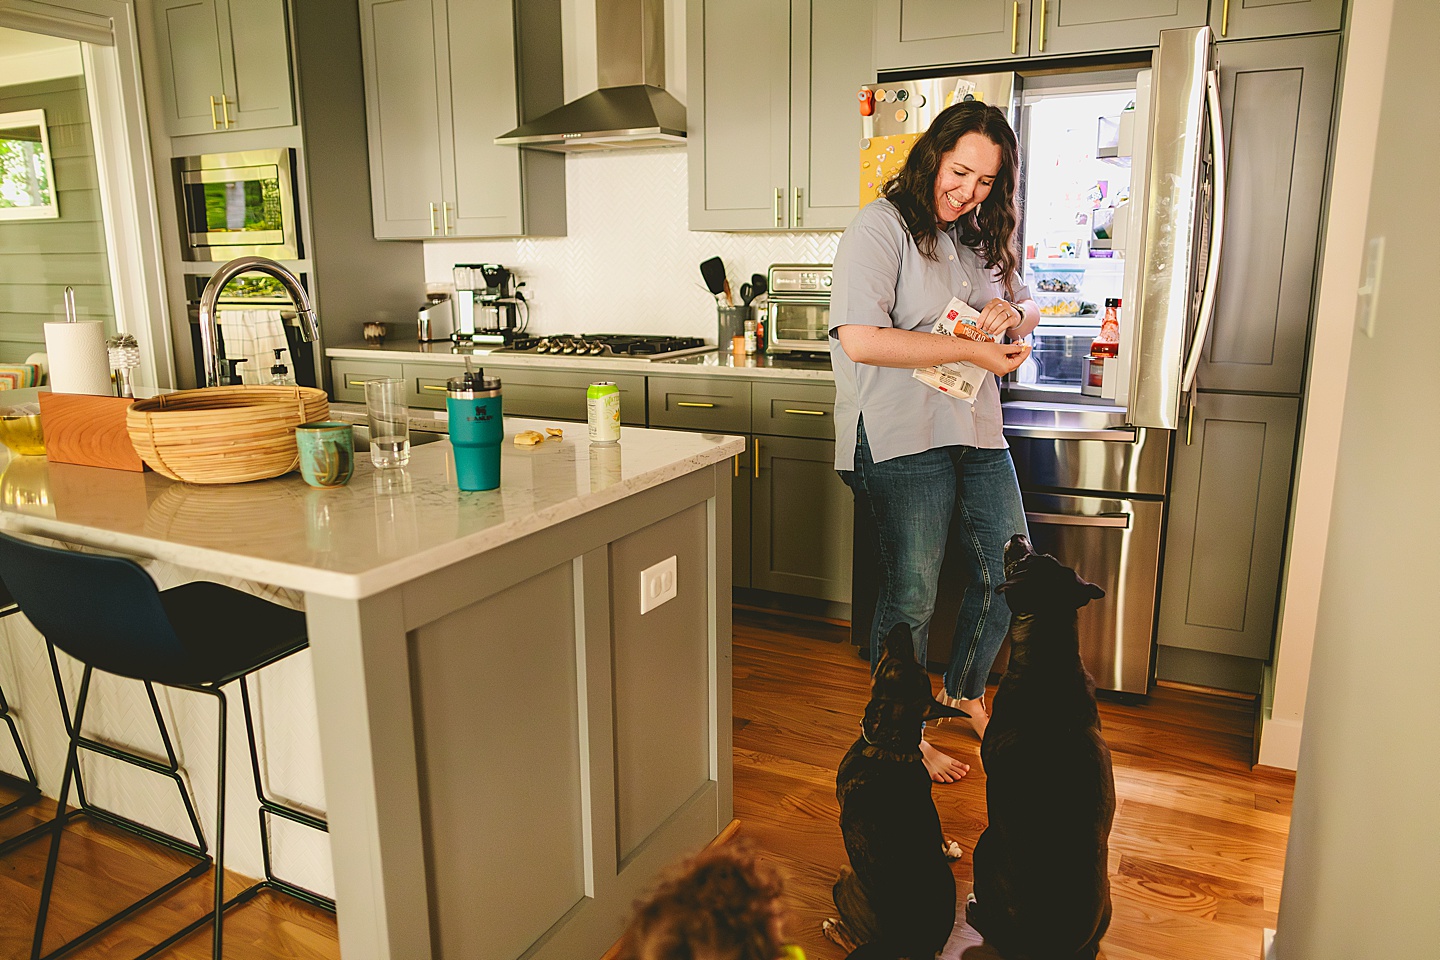 Woman getting cheese out of the fridge to feed dogs